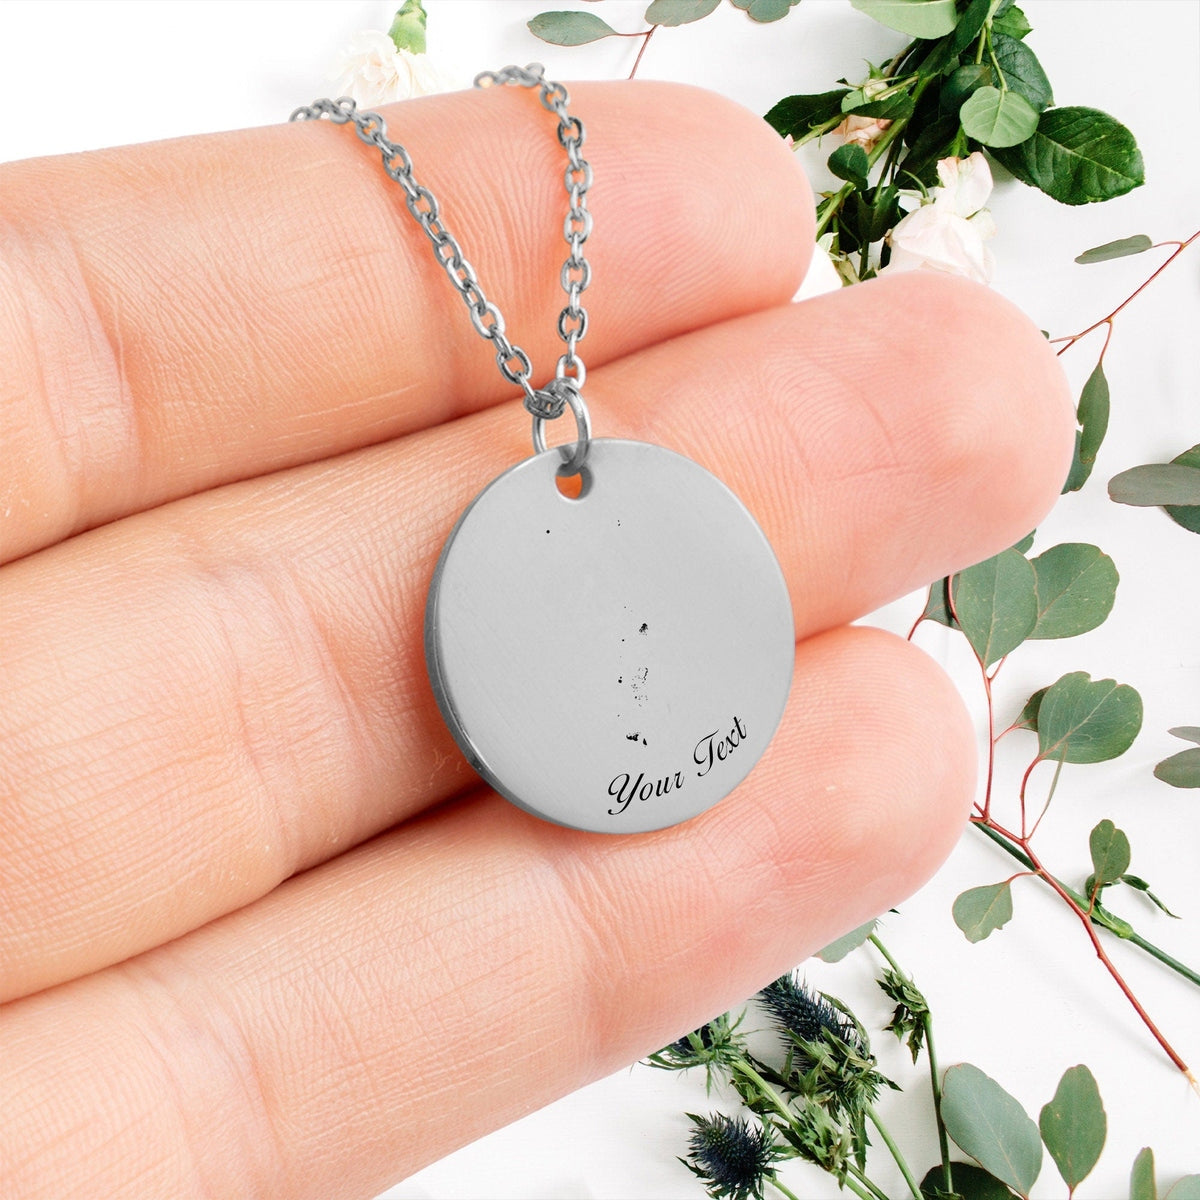 Tonga Country Map Necklace, Your Name Necklace, Minimalist Necklace, Personalized Gift, Silver Necklace, Gift For Him Her